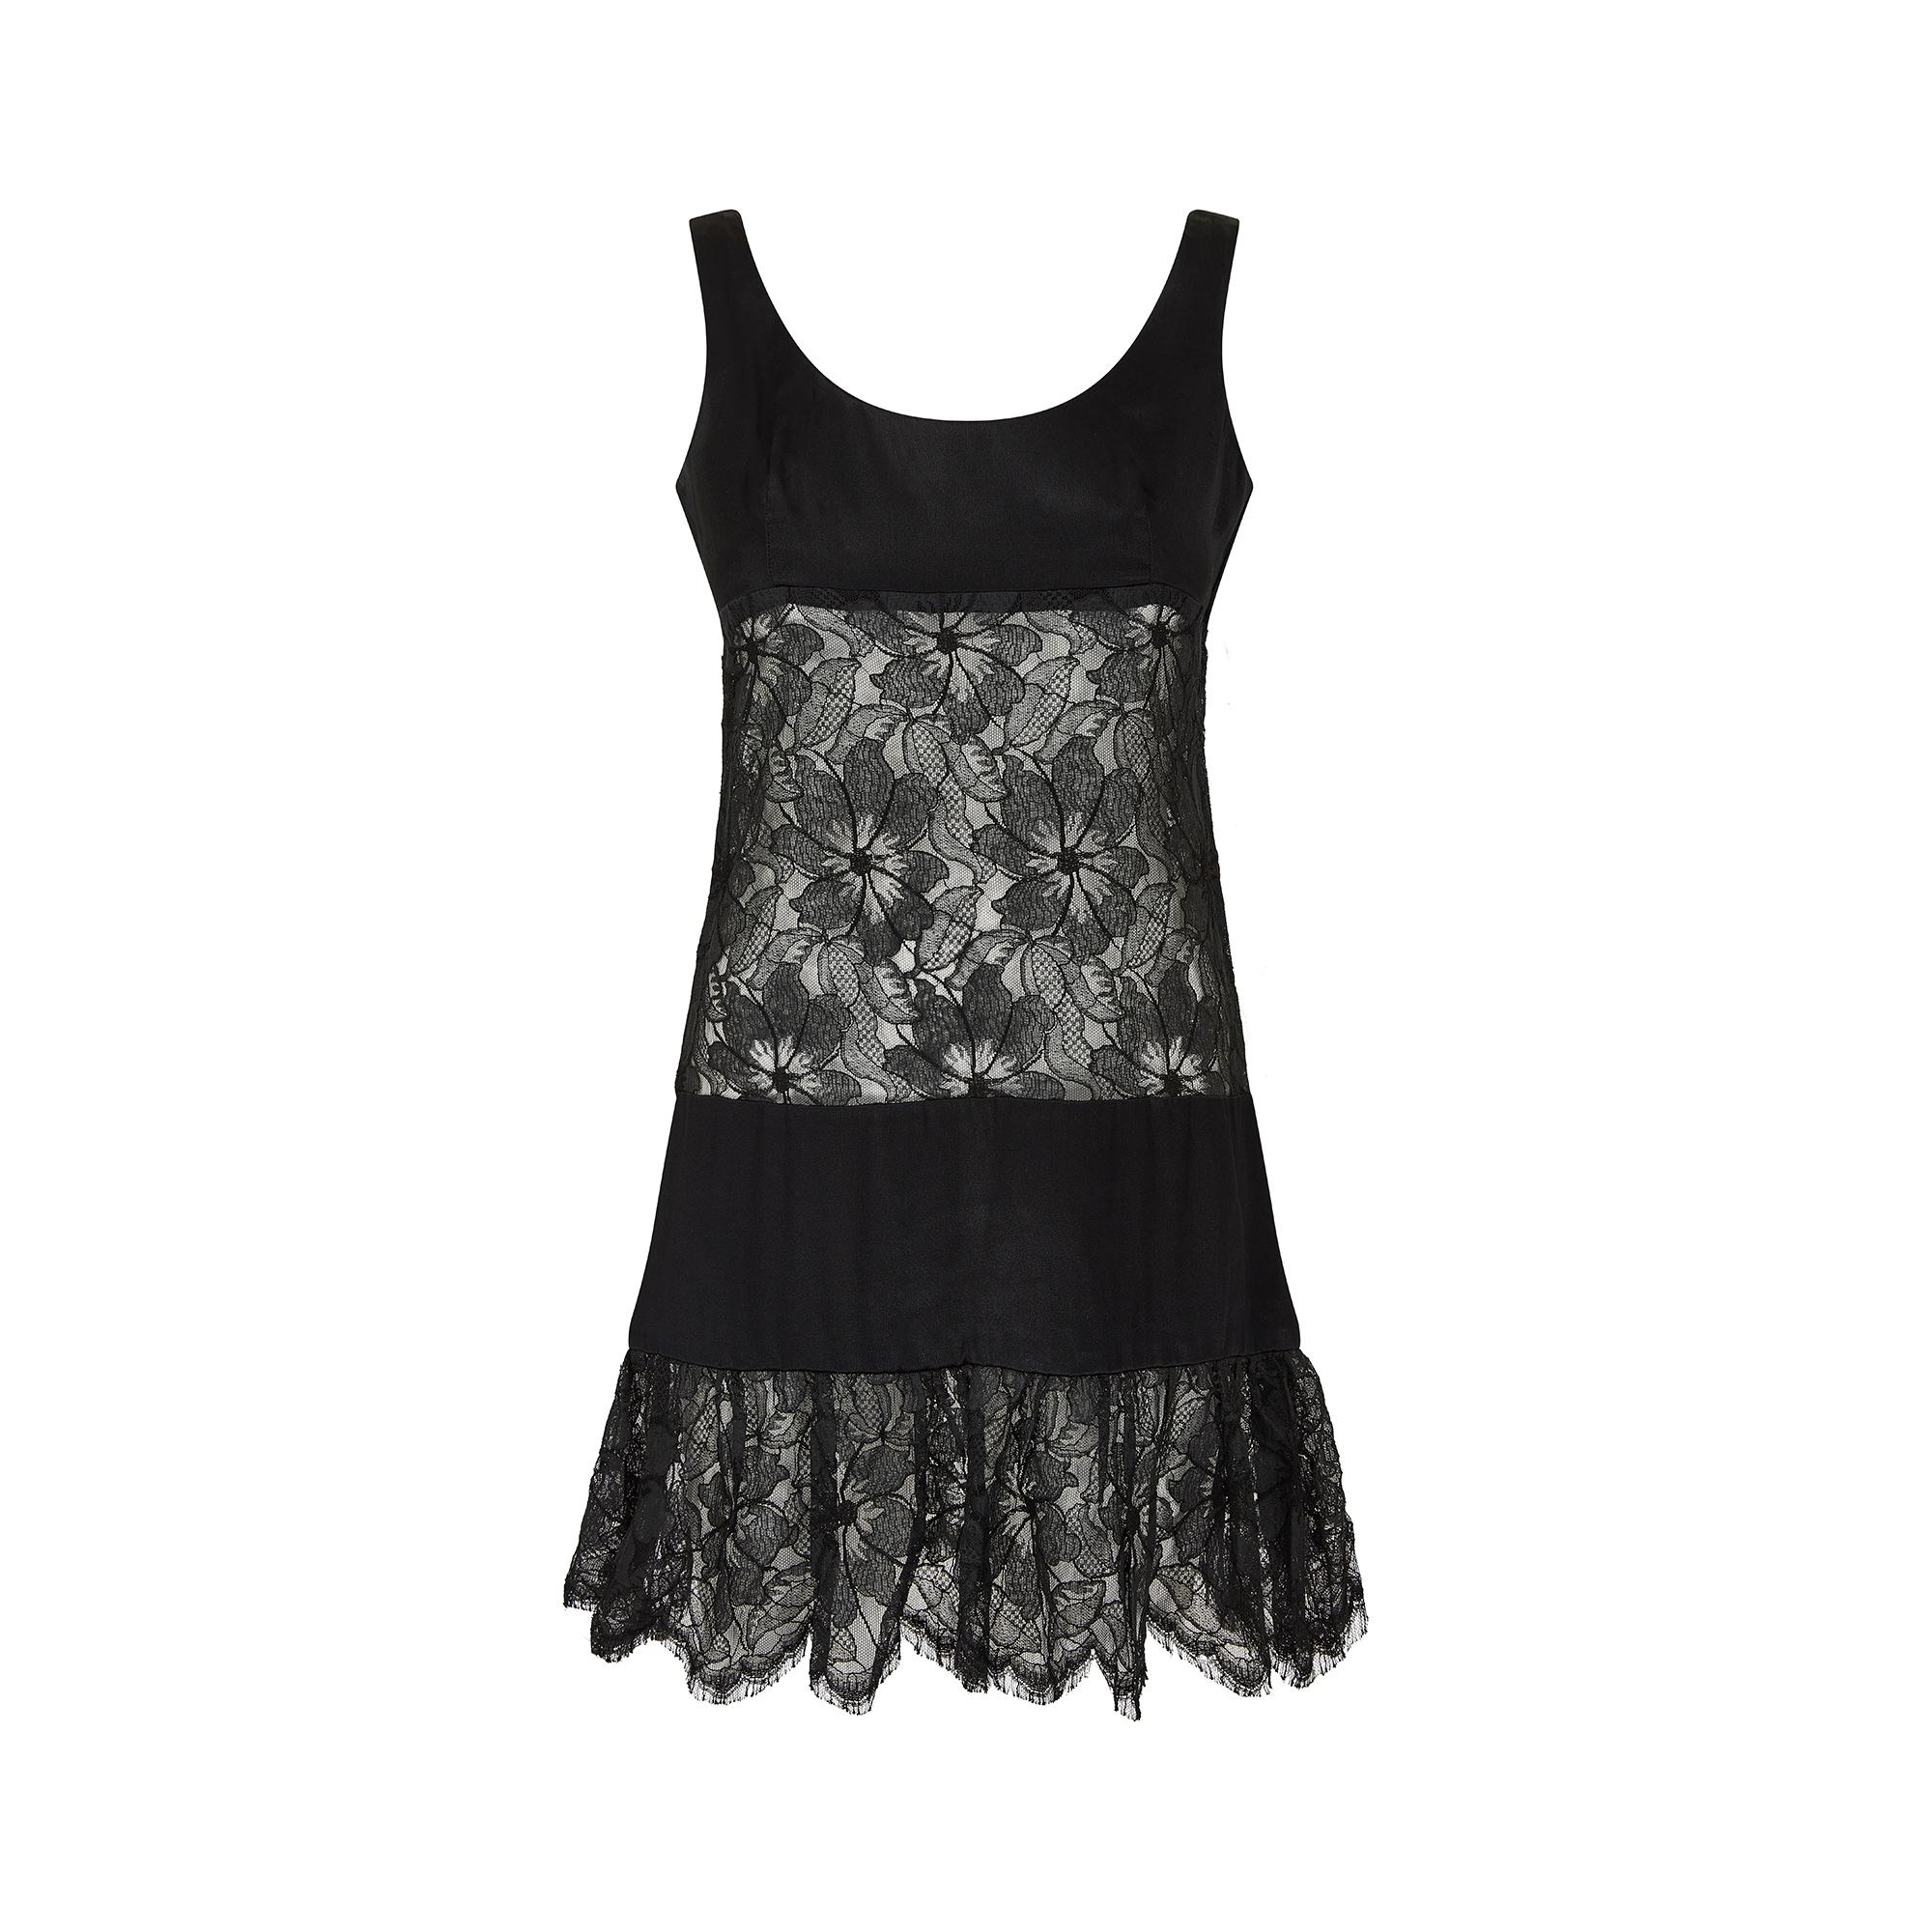 This mid to late 1960s cocktail or party dress is composed of three tiers and a lace ruffle panelling at the bottom of the dress. Panels are made of a transparent black floral lace and black satin. The satin fabric appears to have a grain, and is